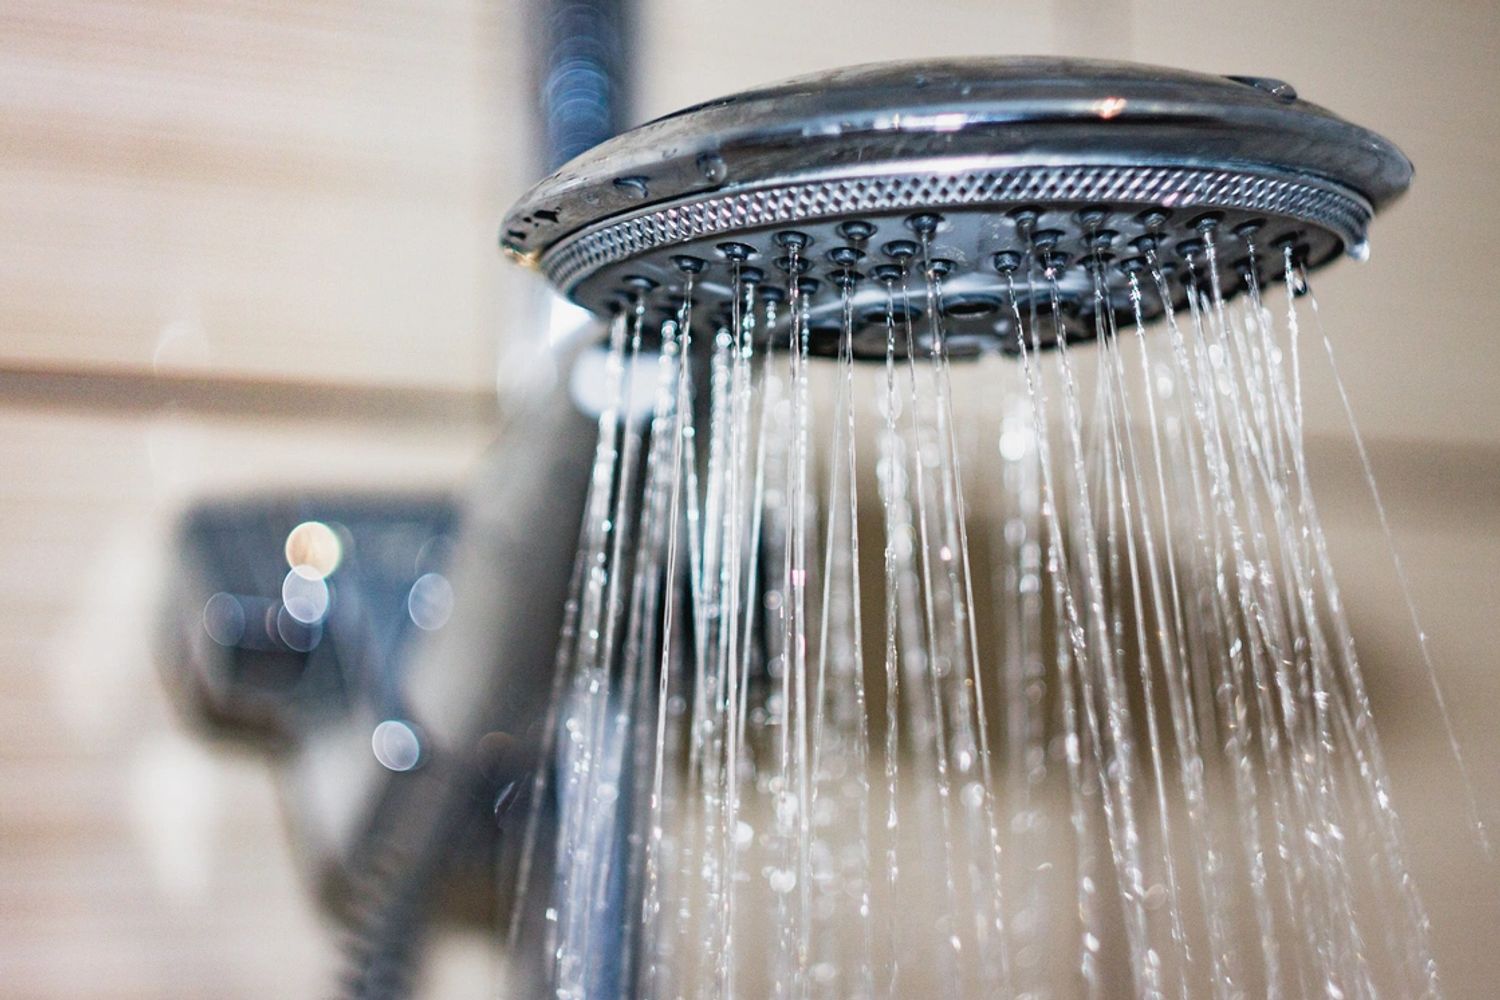 A new, stainless steel shower head gently spouting water.